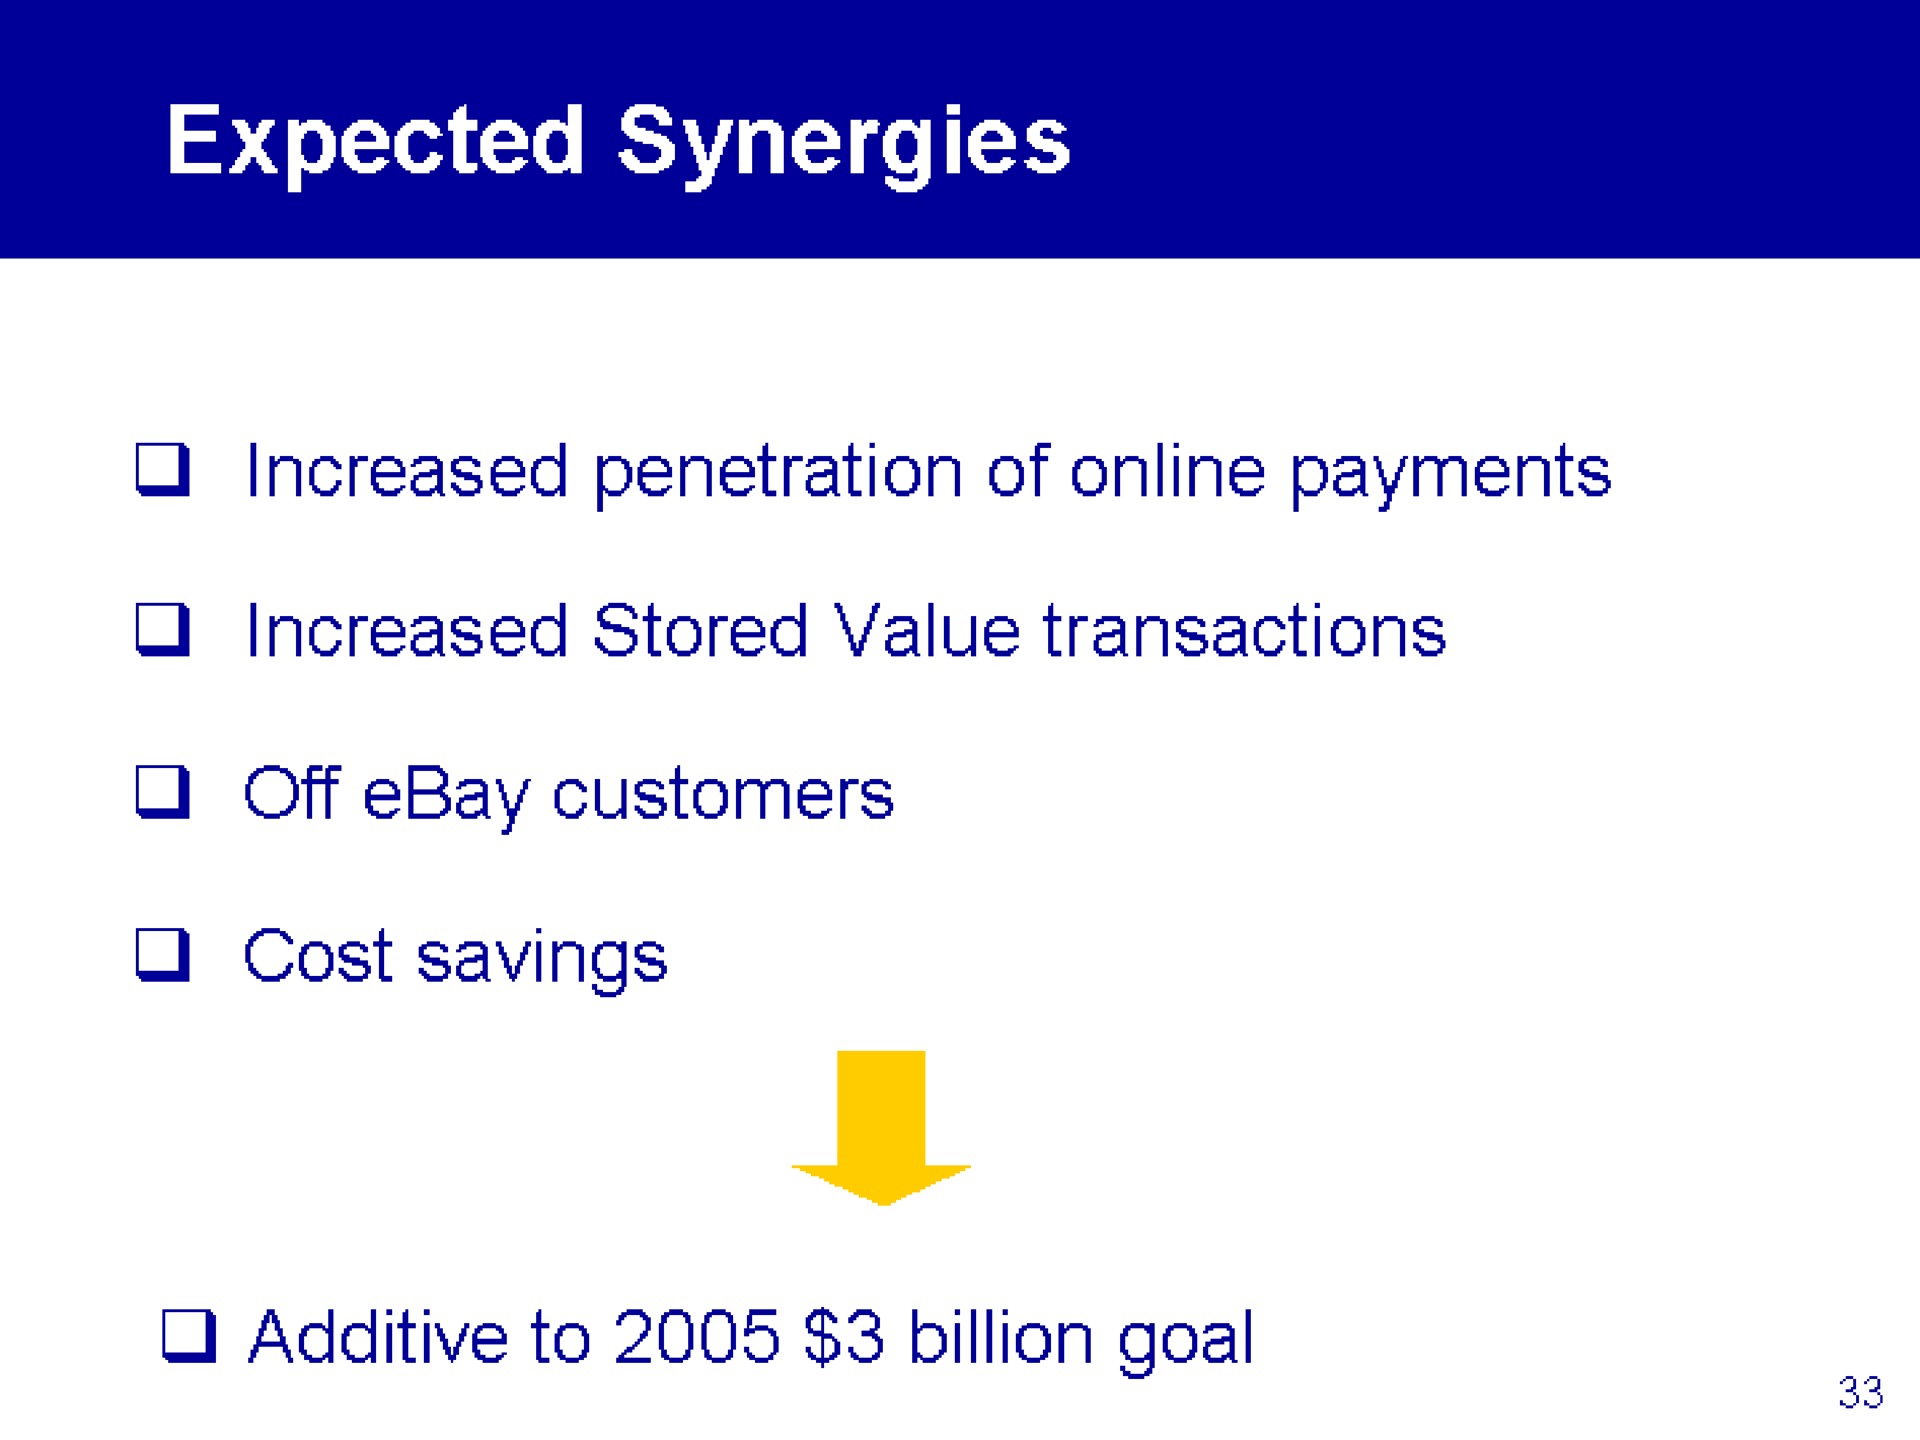 expected synergies | eBay